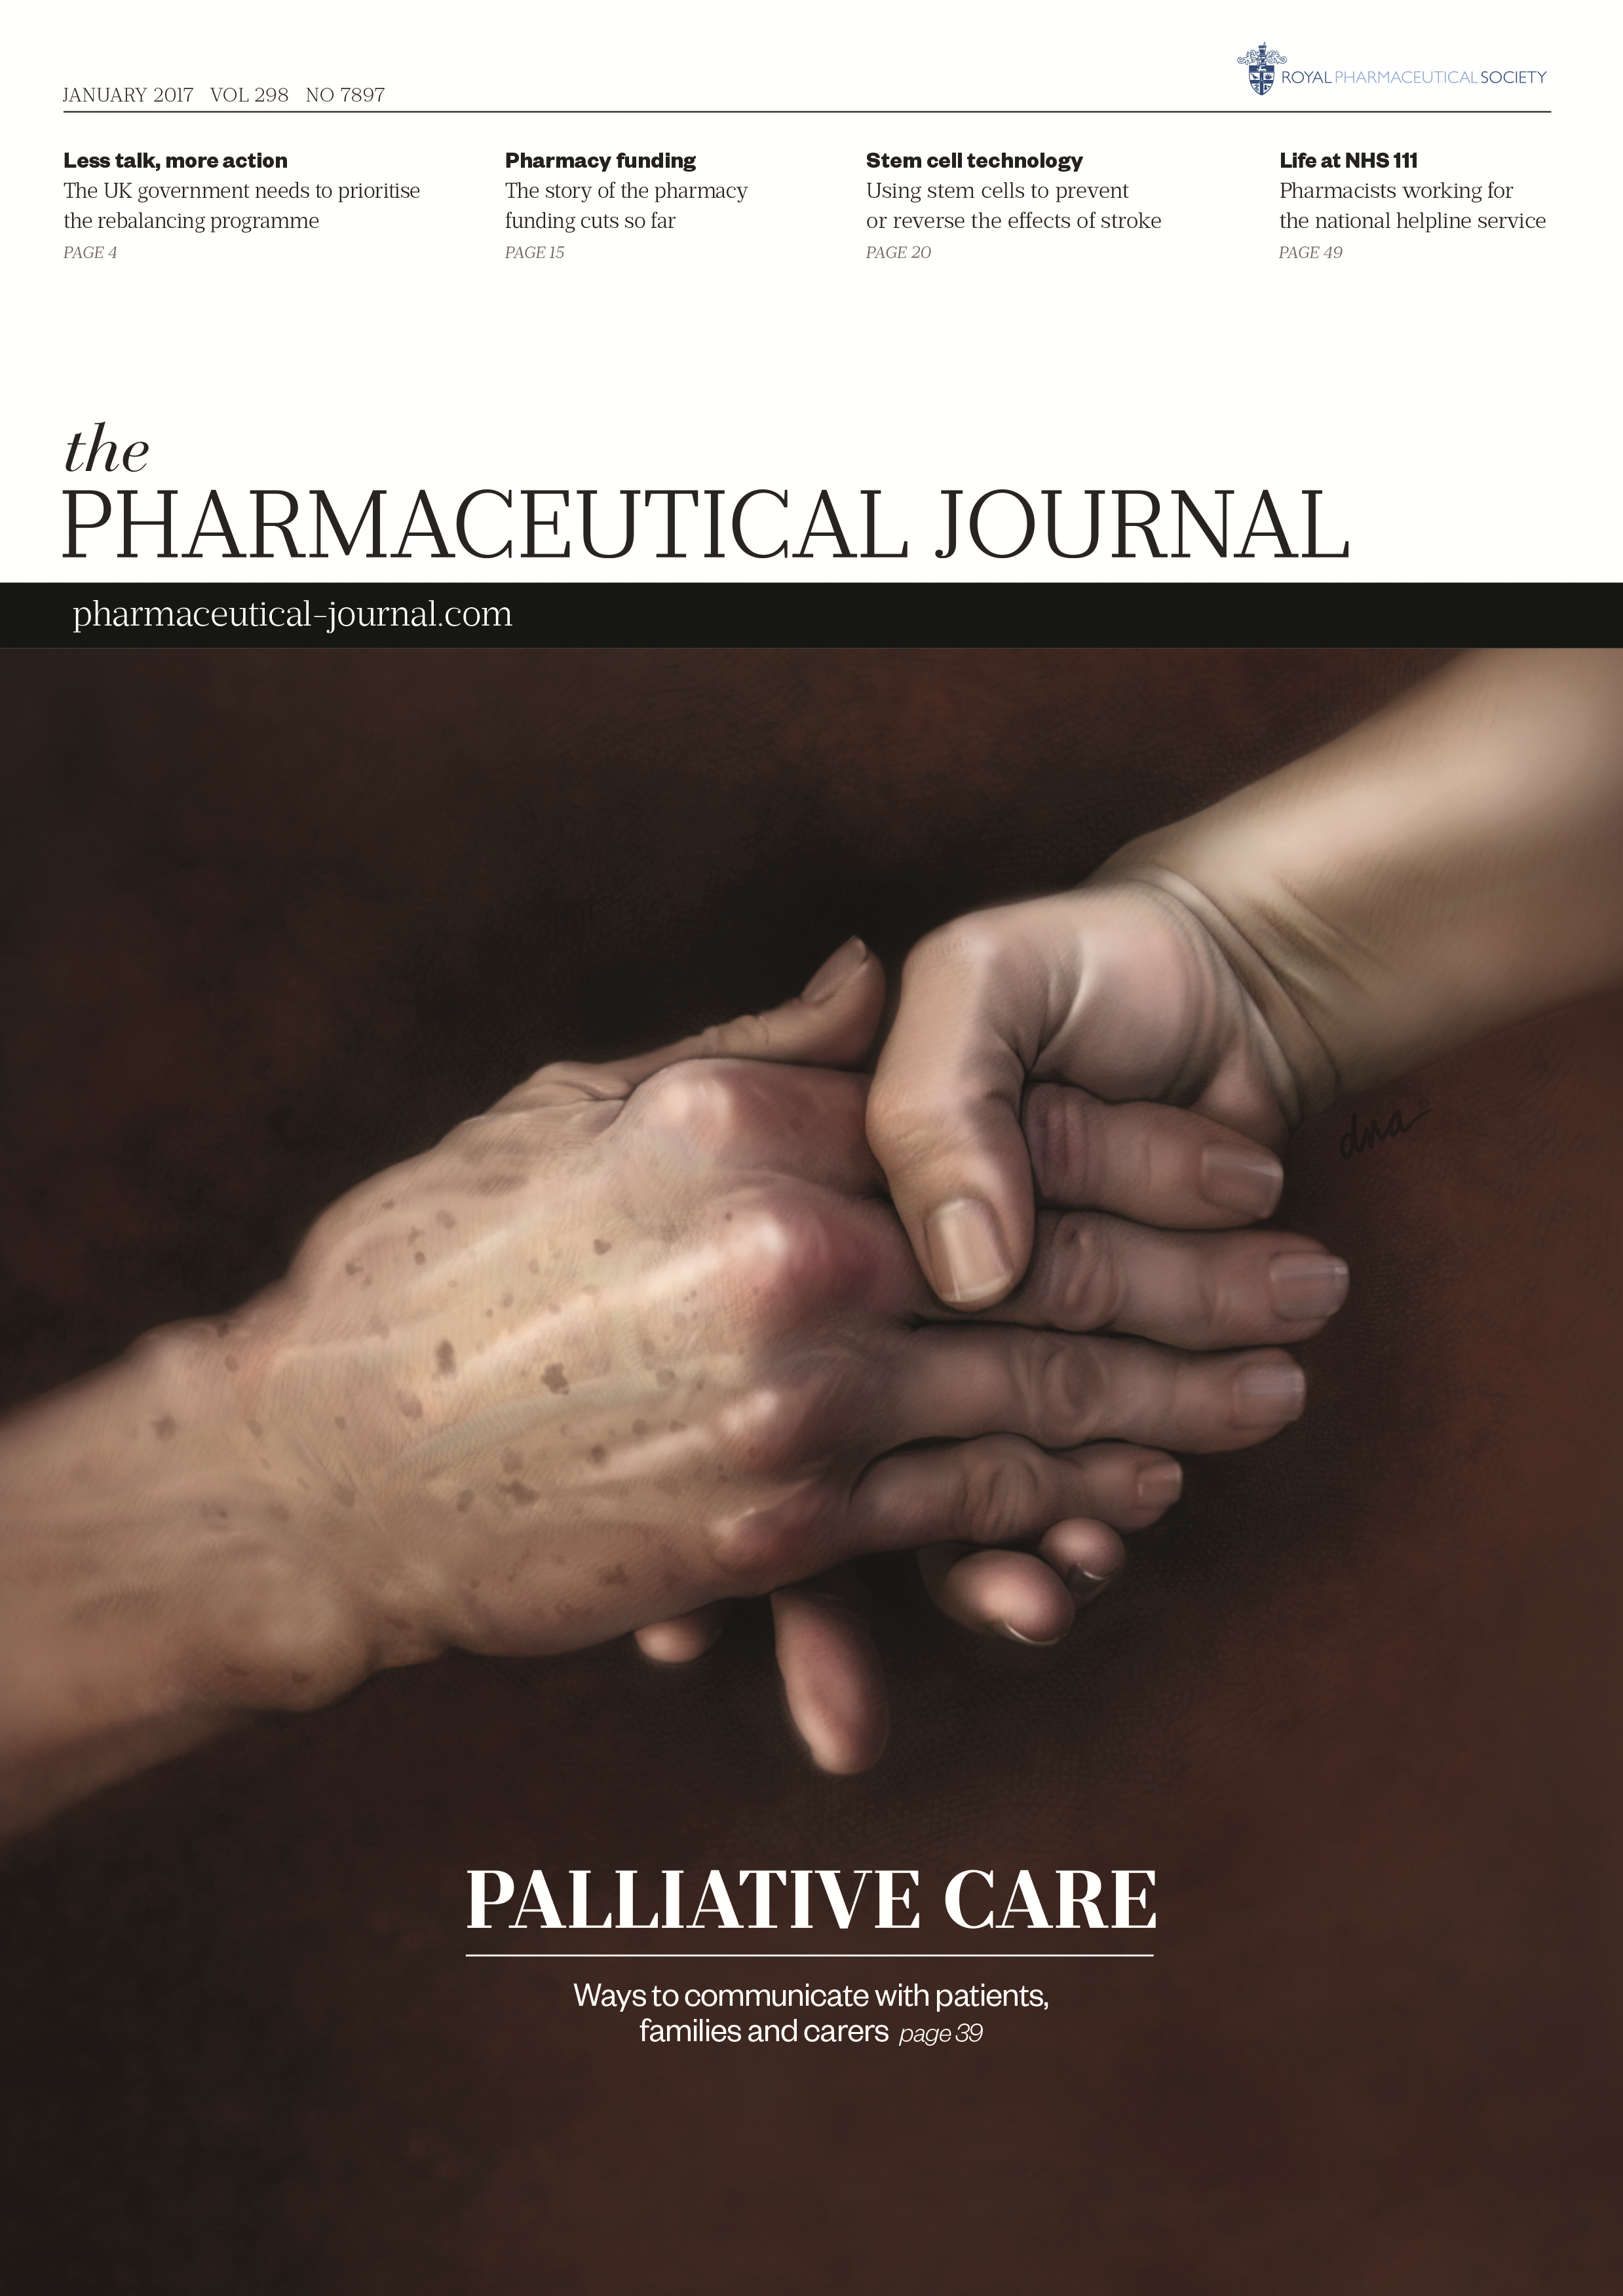 Publication issue cover for PJ, January 2017, Vol 298, No 7897